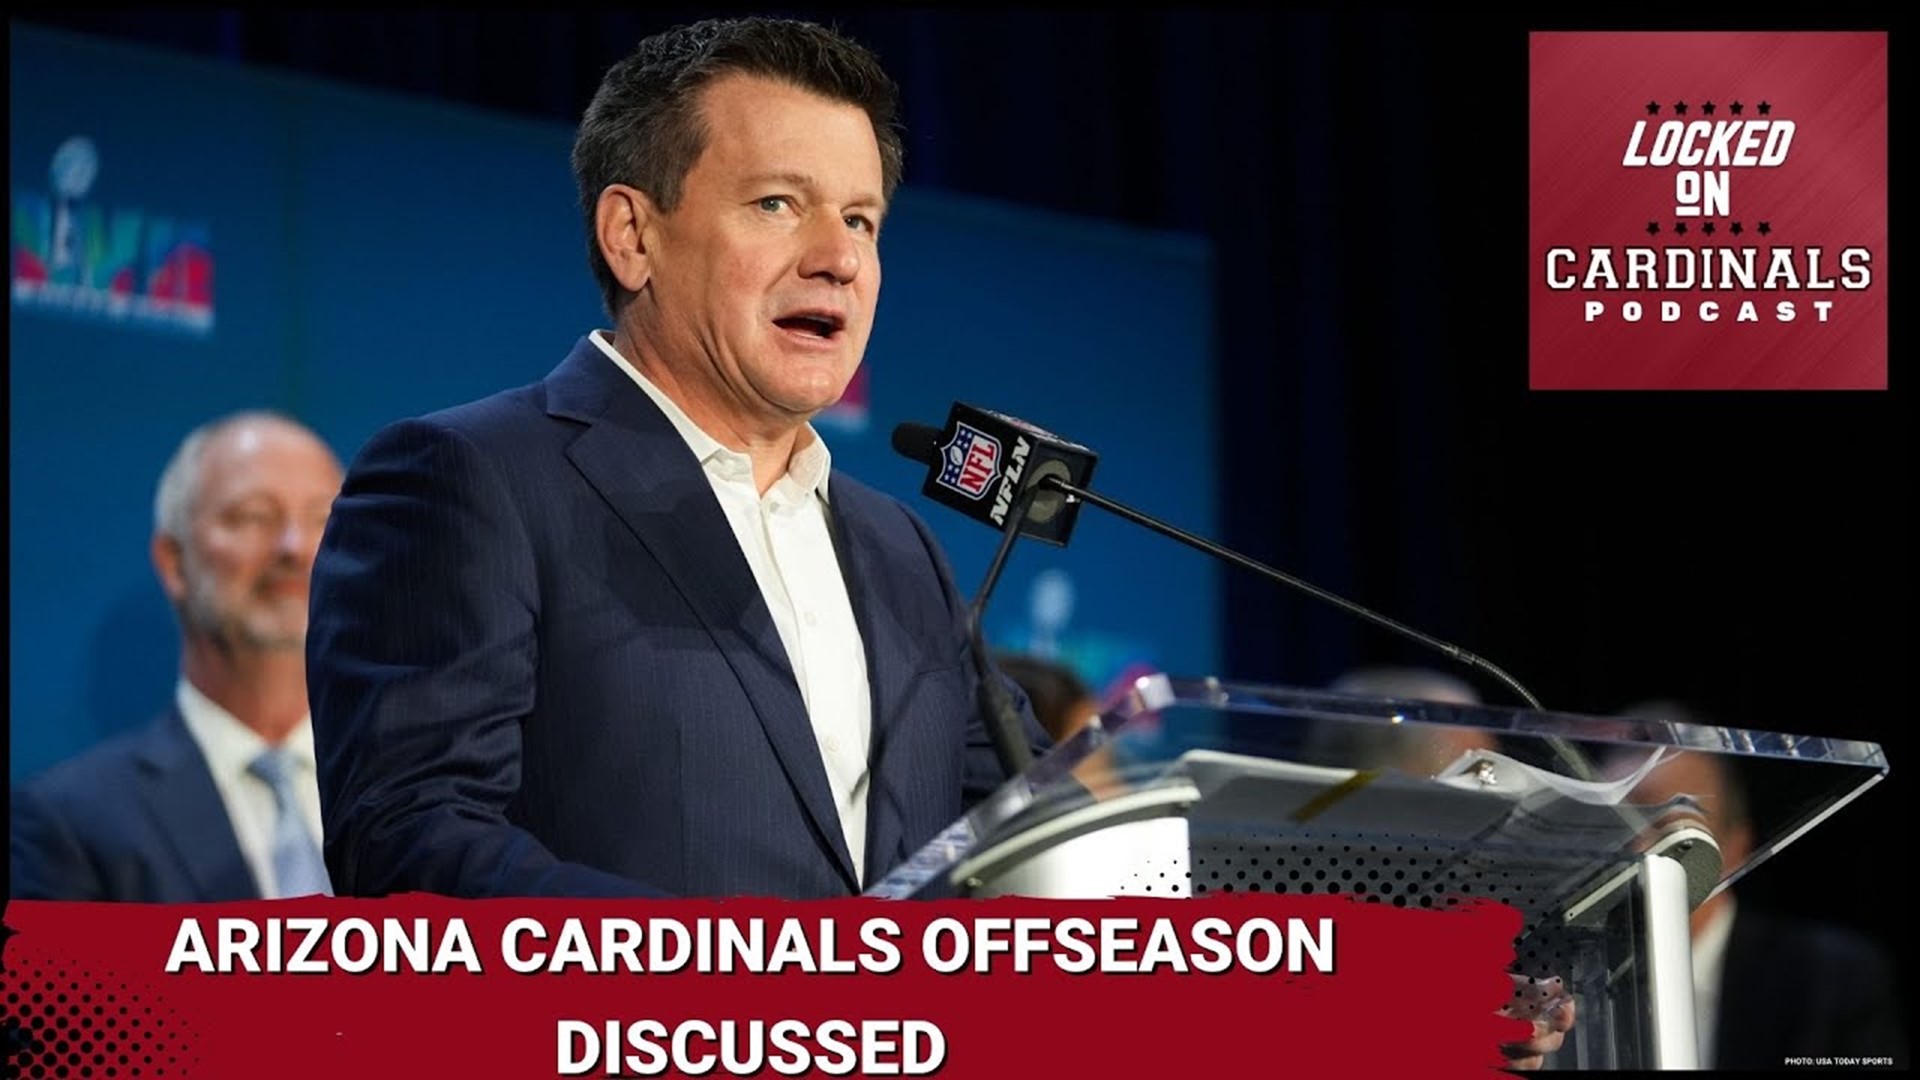 It's been a wild offseason for the Arizona Cardinals filled with everything from firings, hirings, dormancy, trade requests, and a picture-perfect draft.